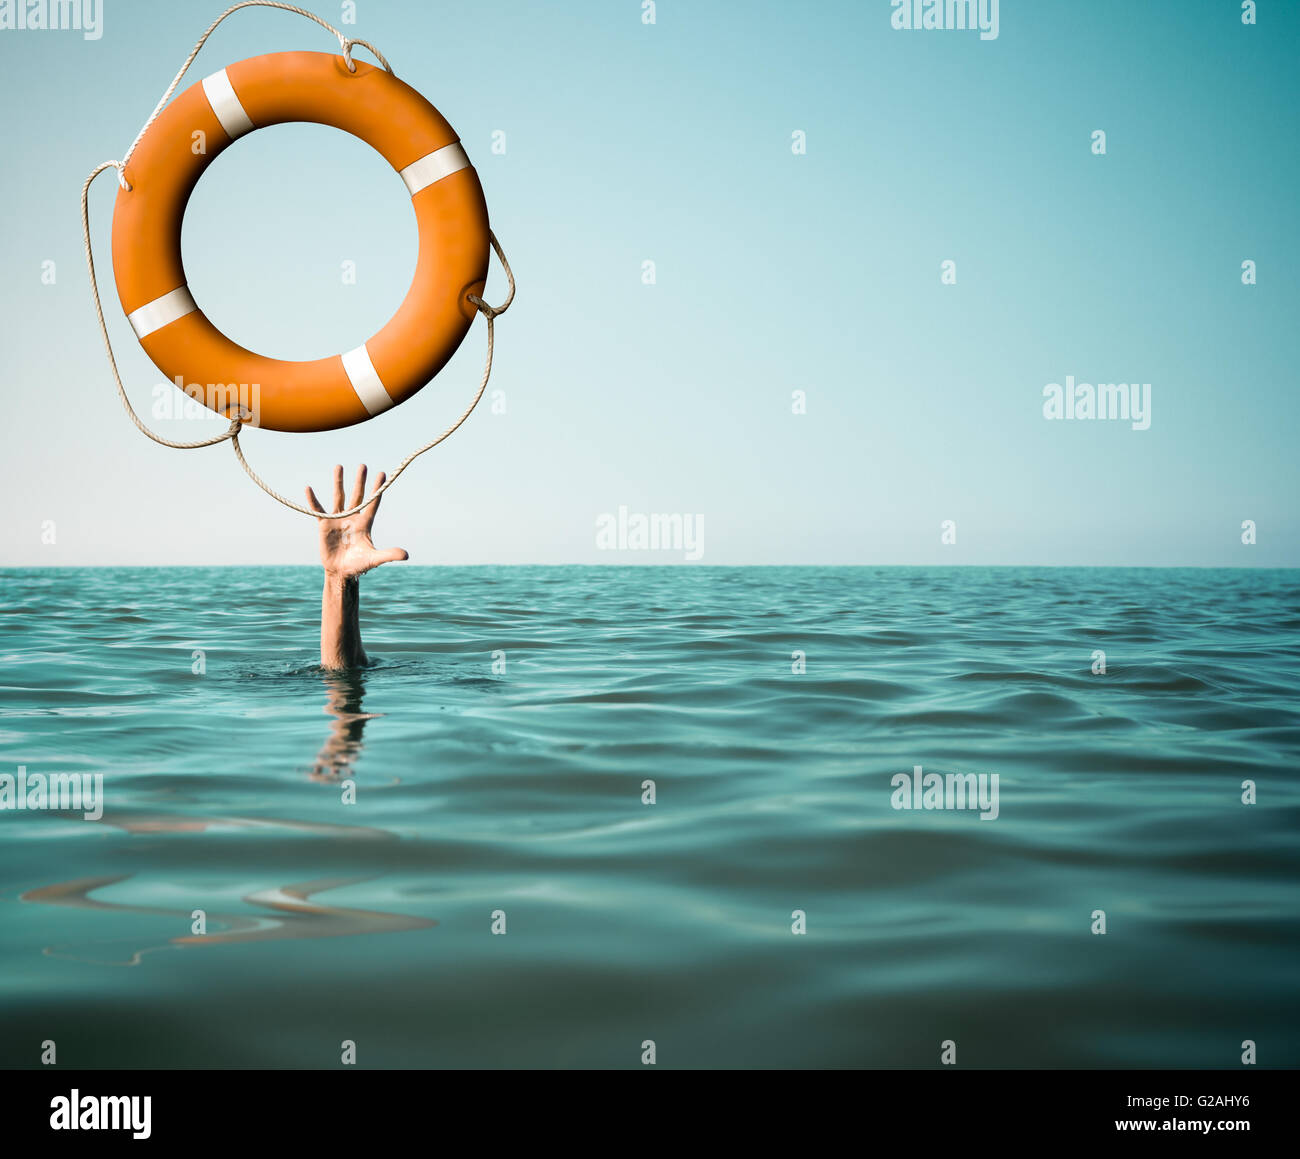 Drown man with rised hand getting lifebuoy help in sea Stock Photo